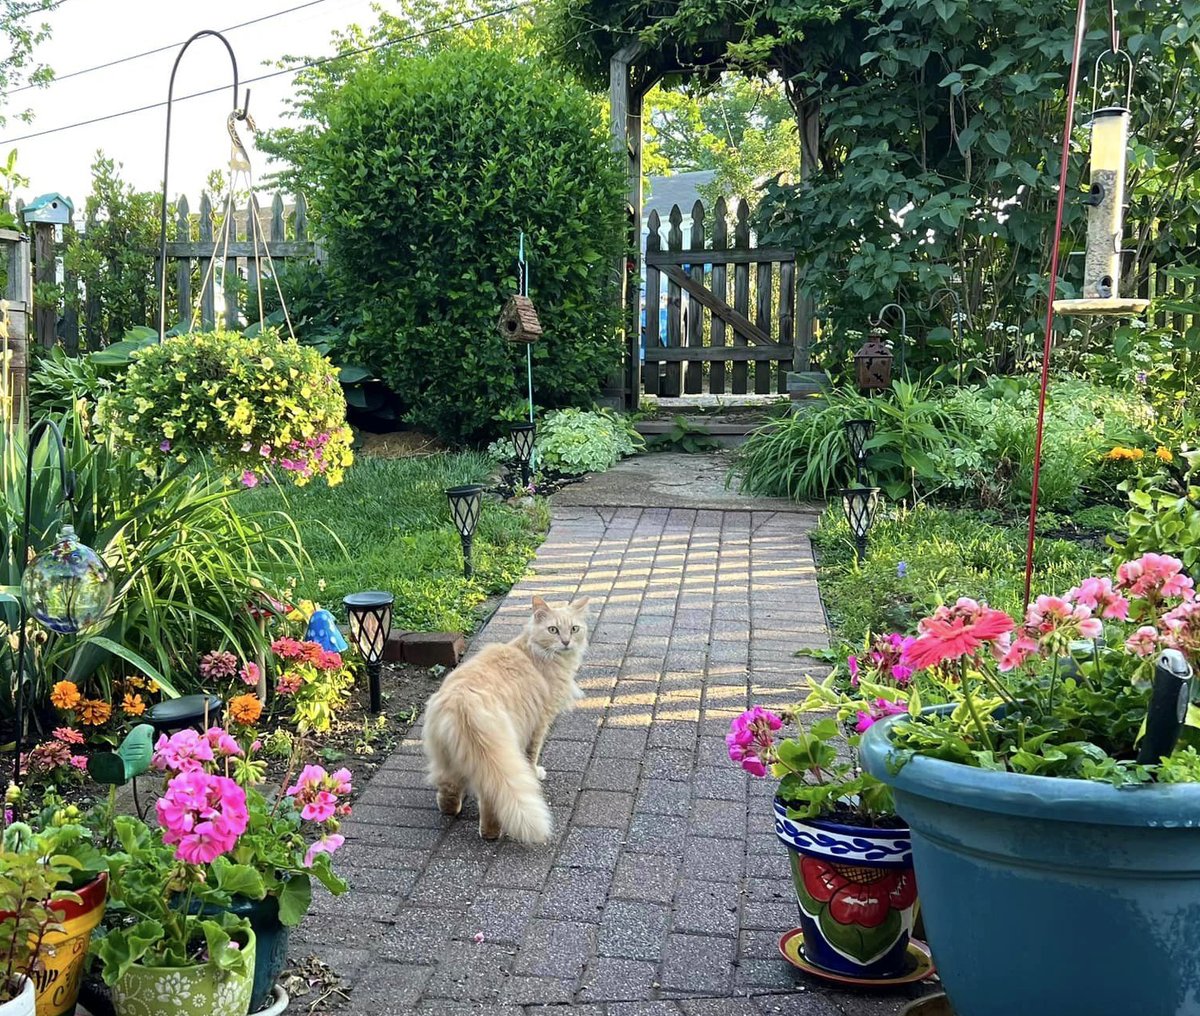 My friend Mollie surveying her beautiful garden. Anyone else have spring flowers in bloom?